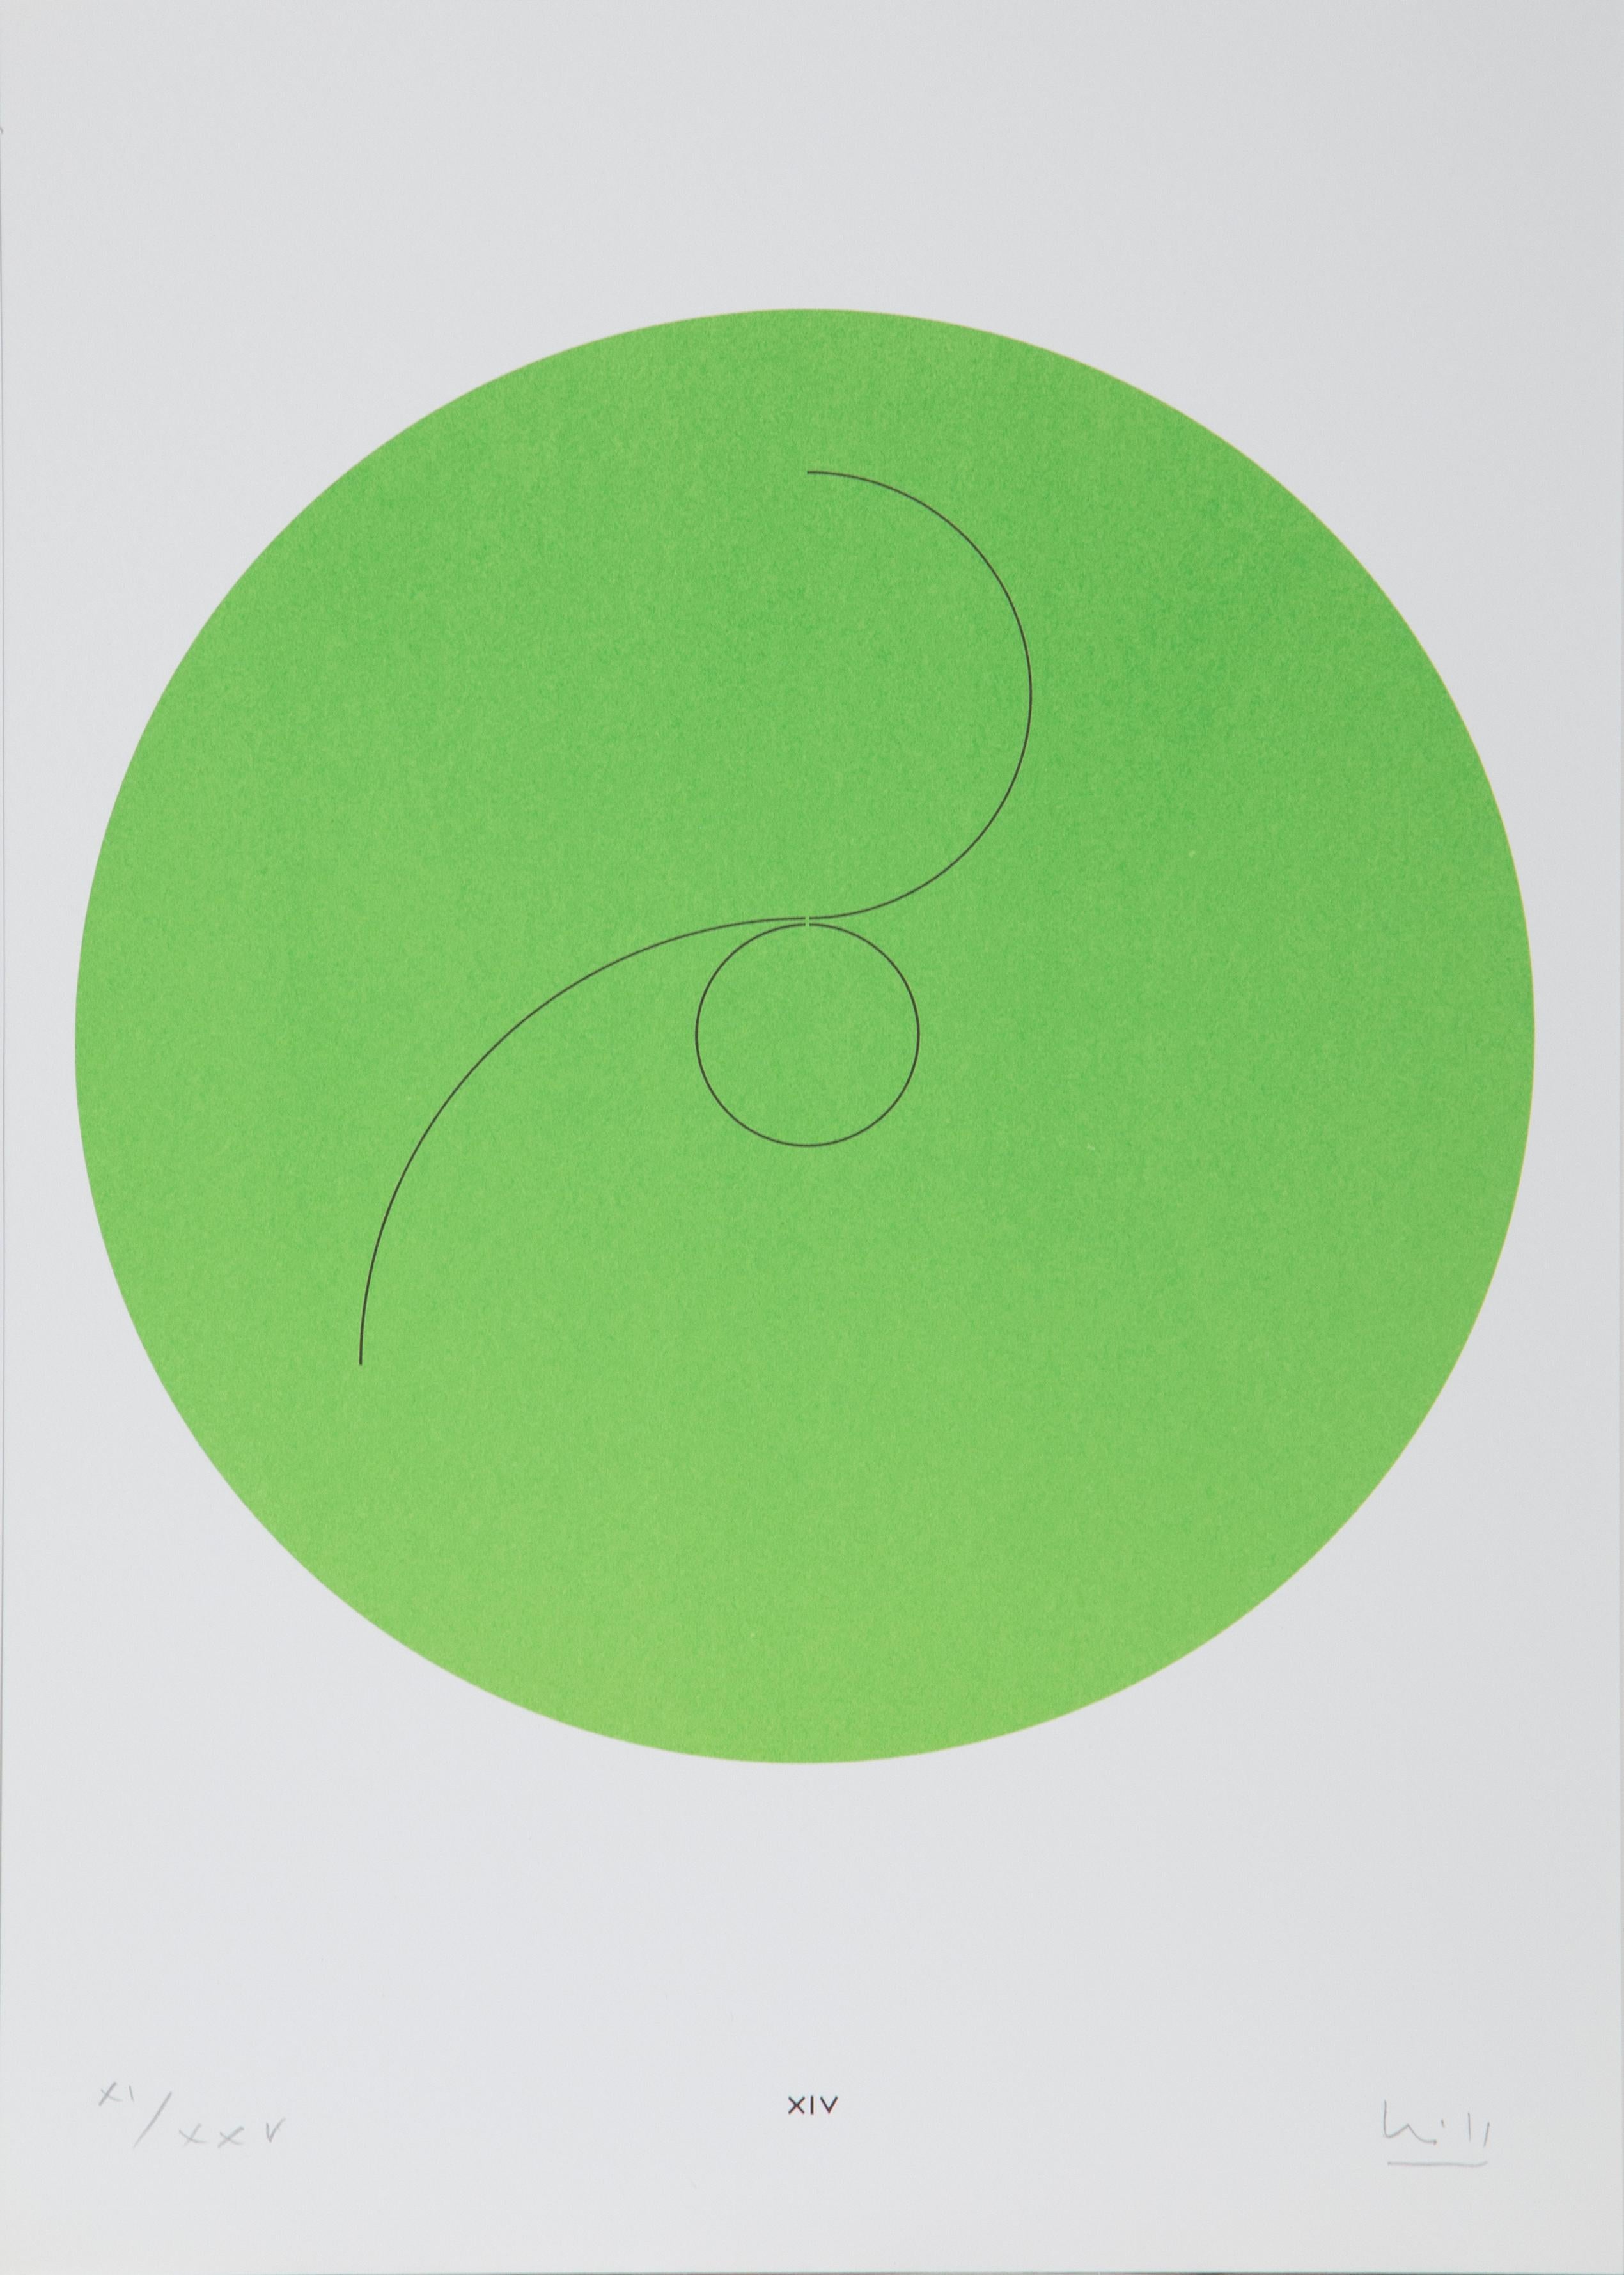 This lithograph was created by Swiss architect, designer, and artist, Max Bill. Bill is widely considered the single most decisive influence on Swiss graphic design. He sought to create forms that visually represent the New Physics of the early 20th